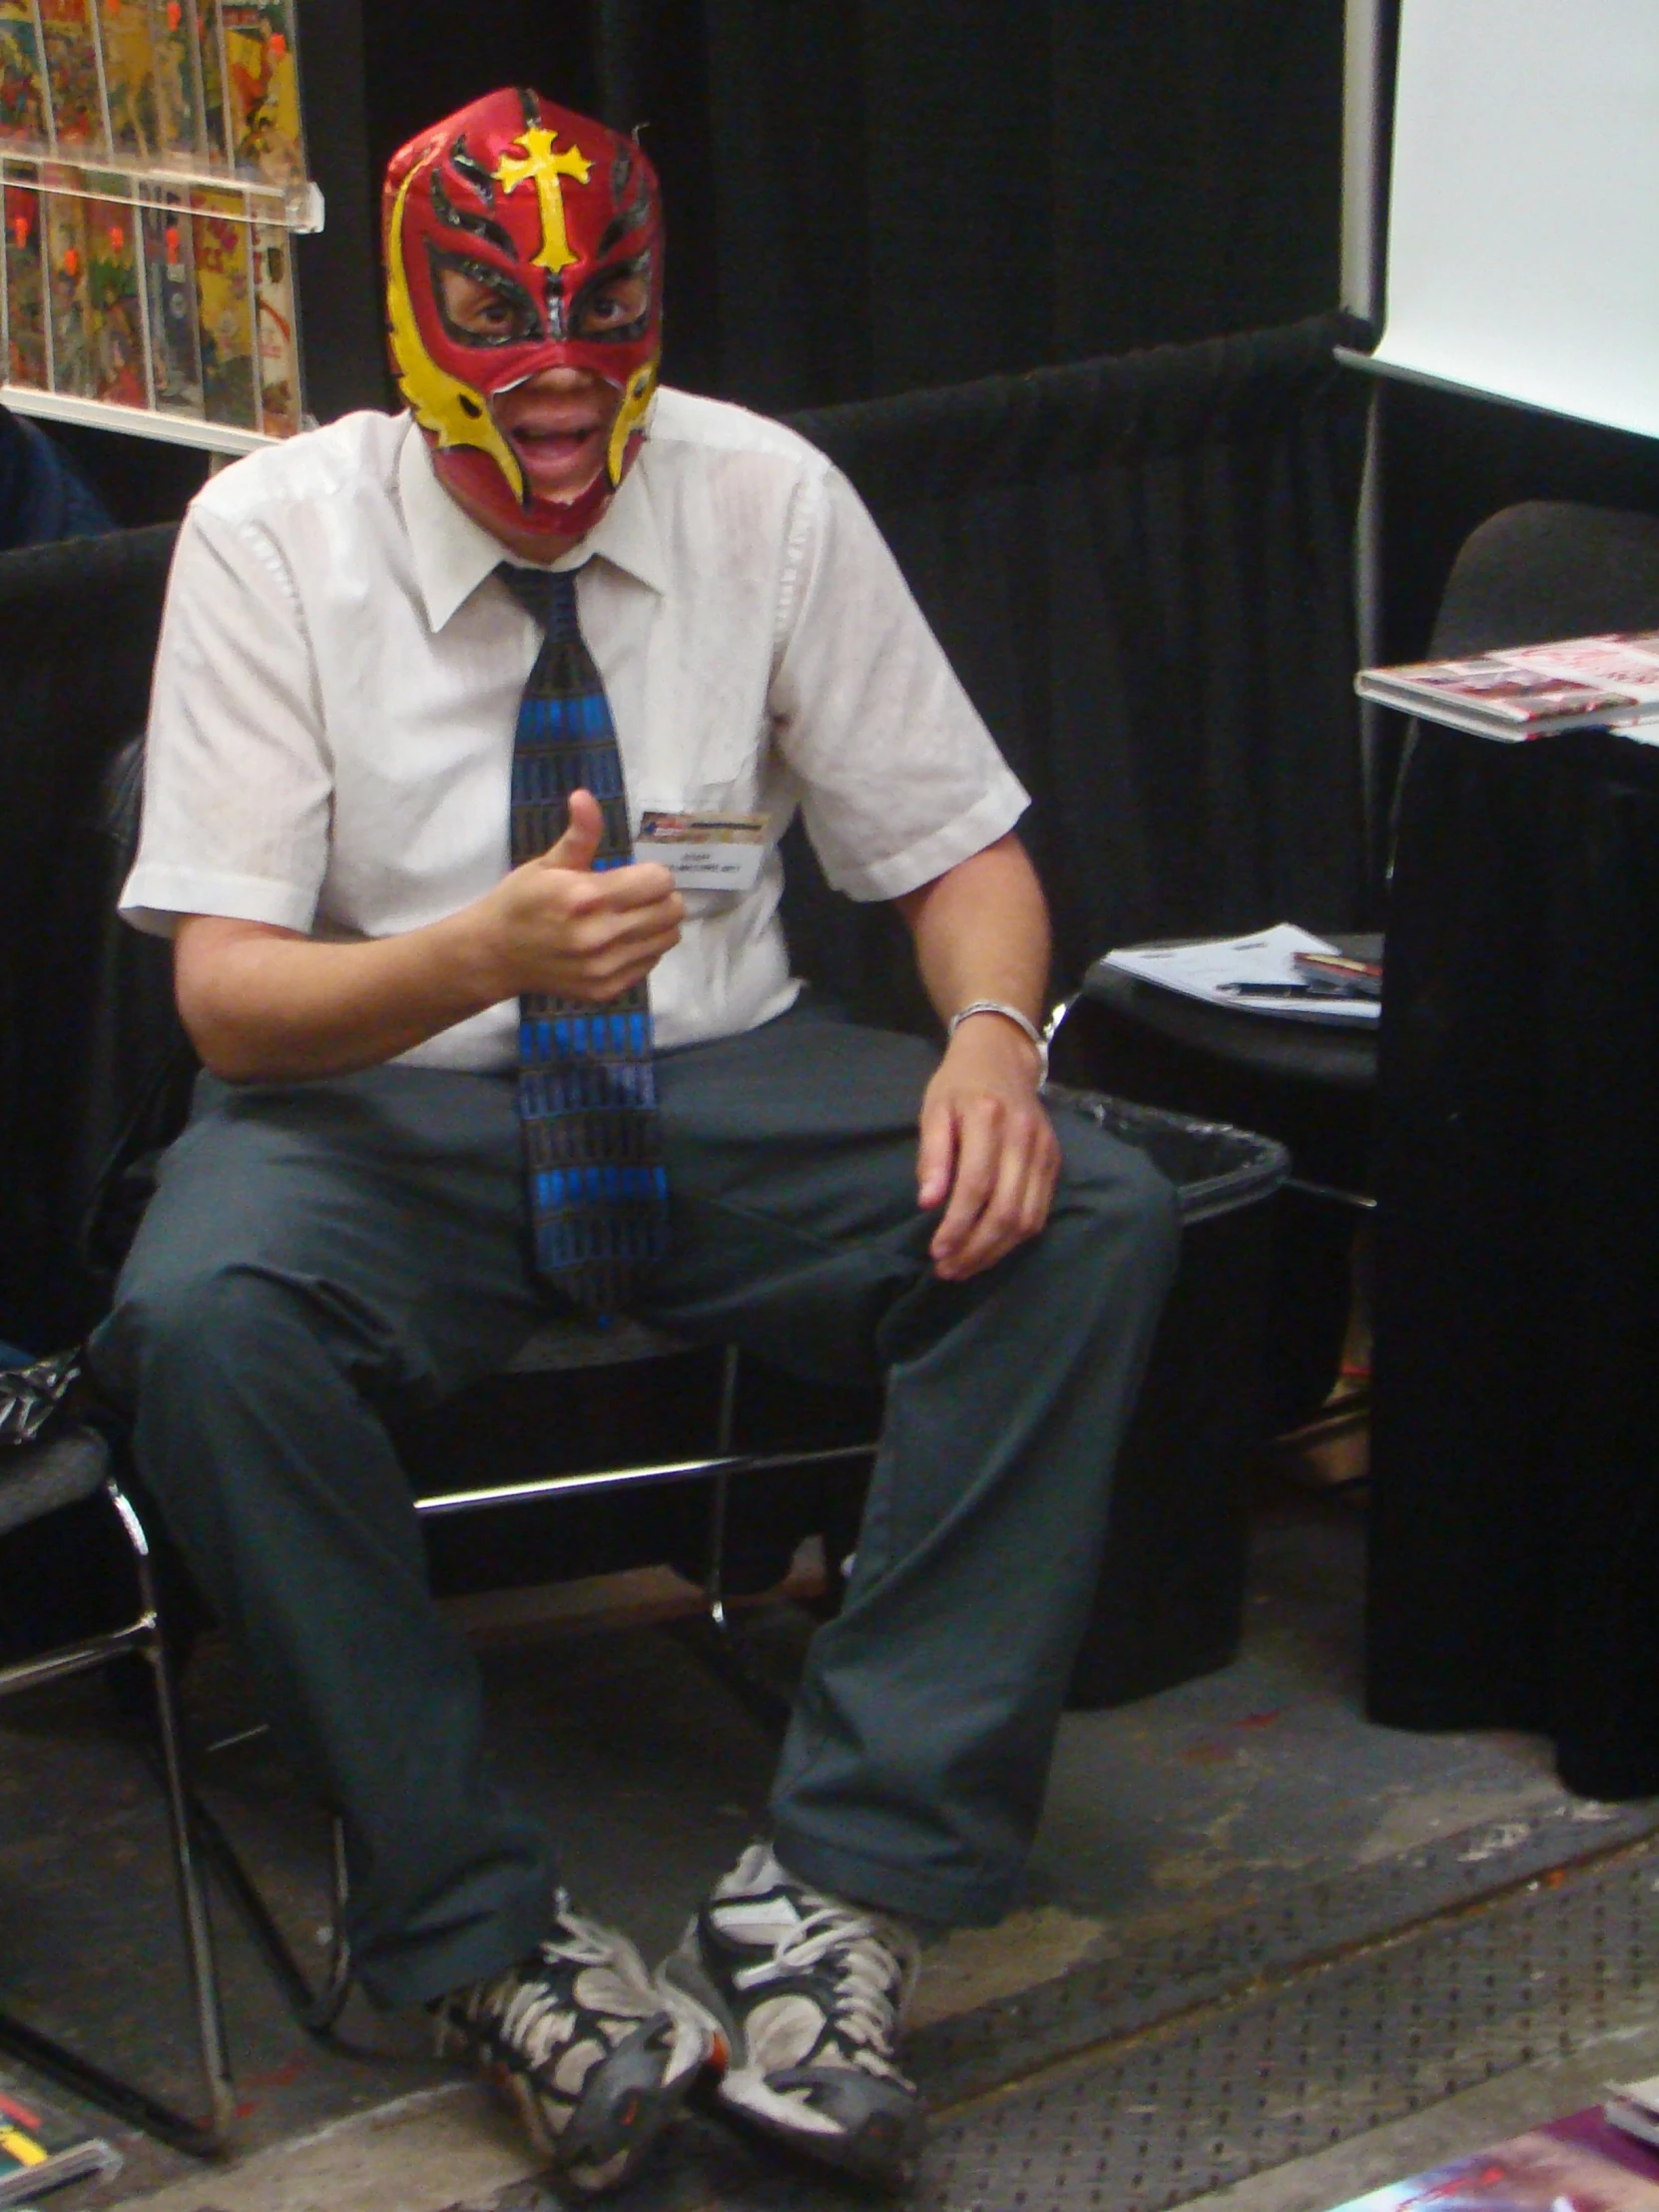 man in business shirt and tie with red mask sitting on chair